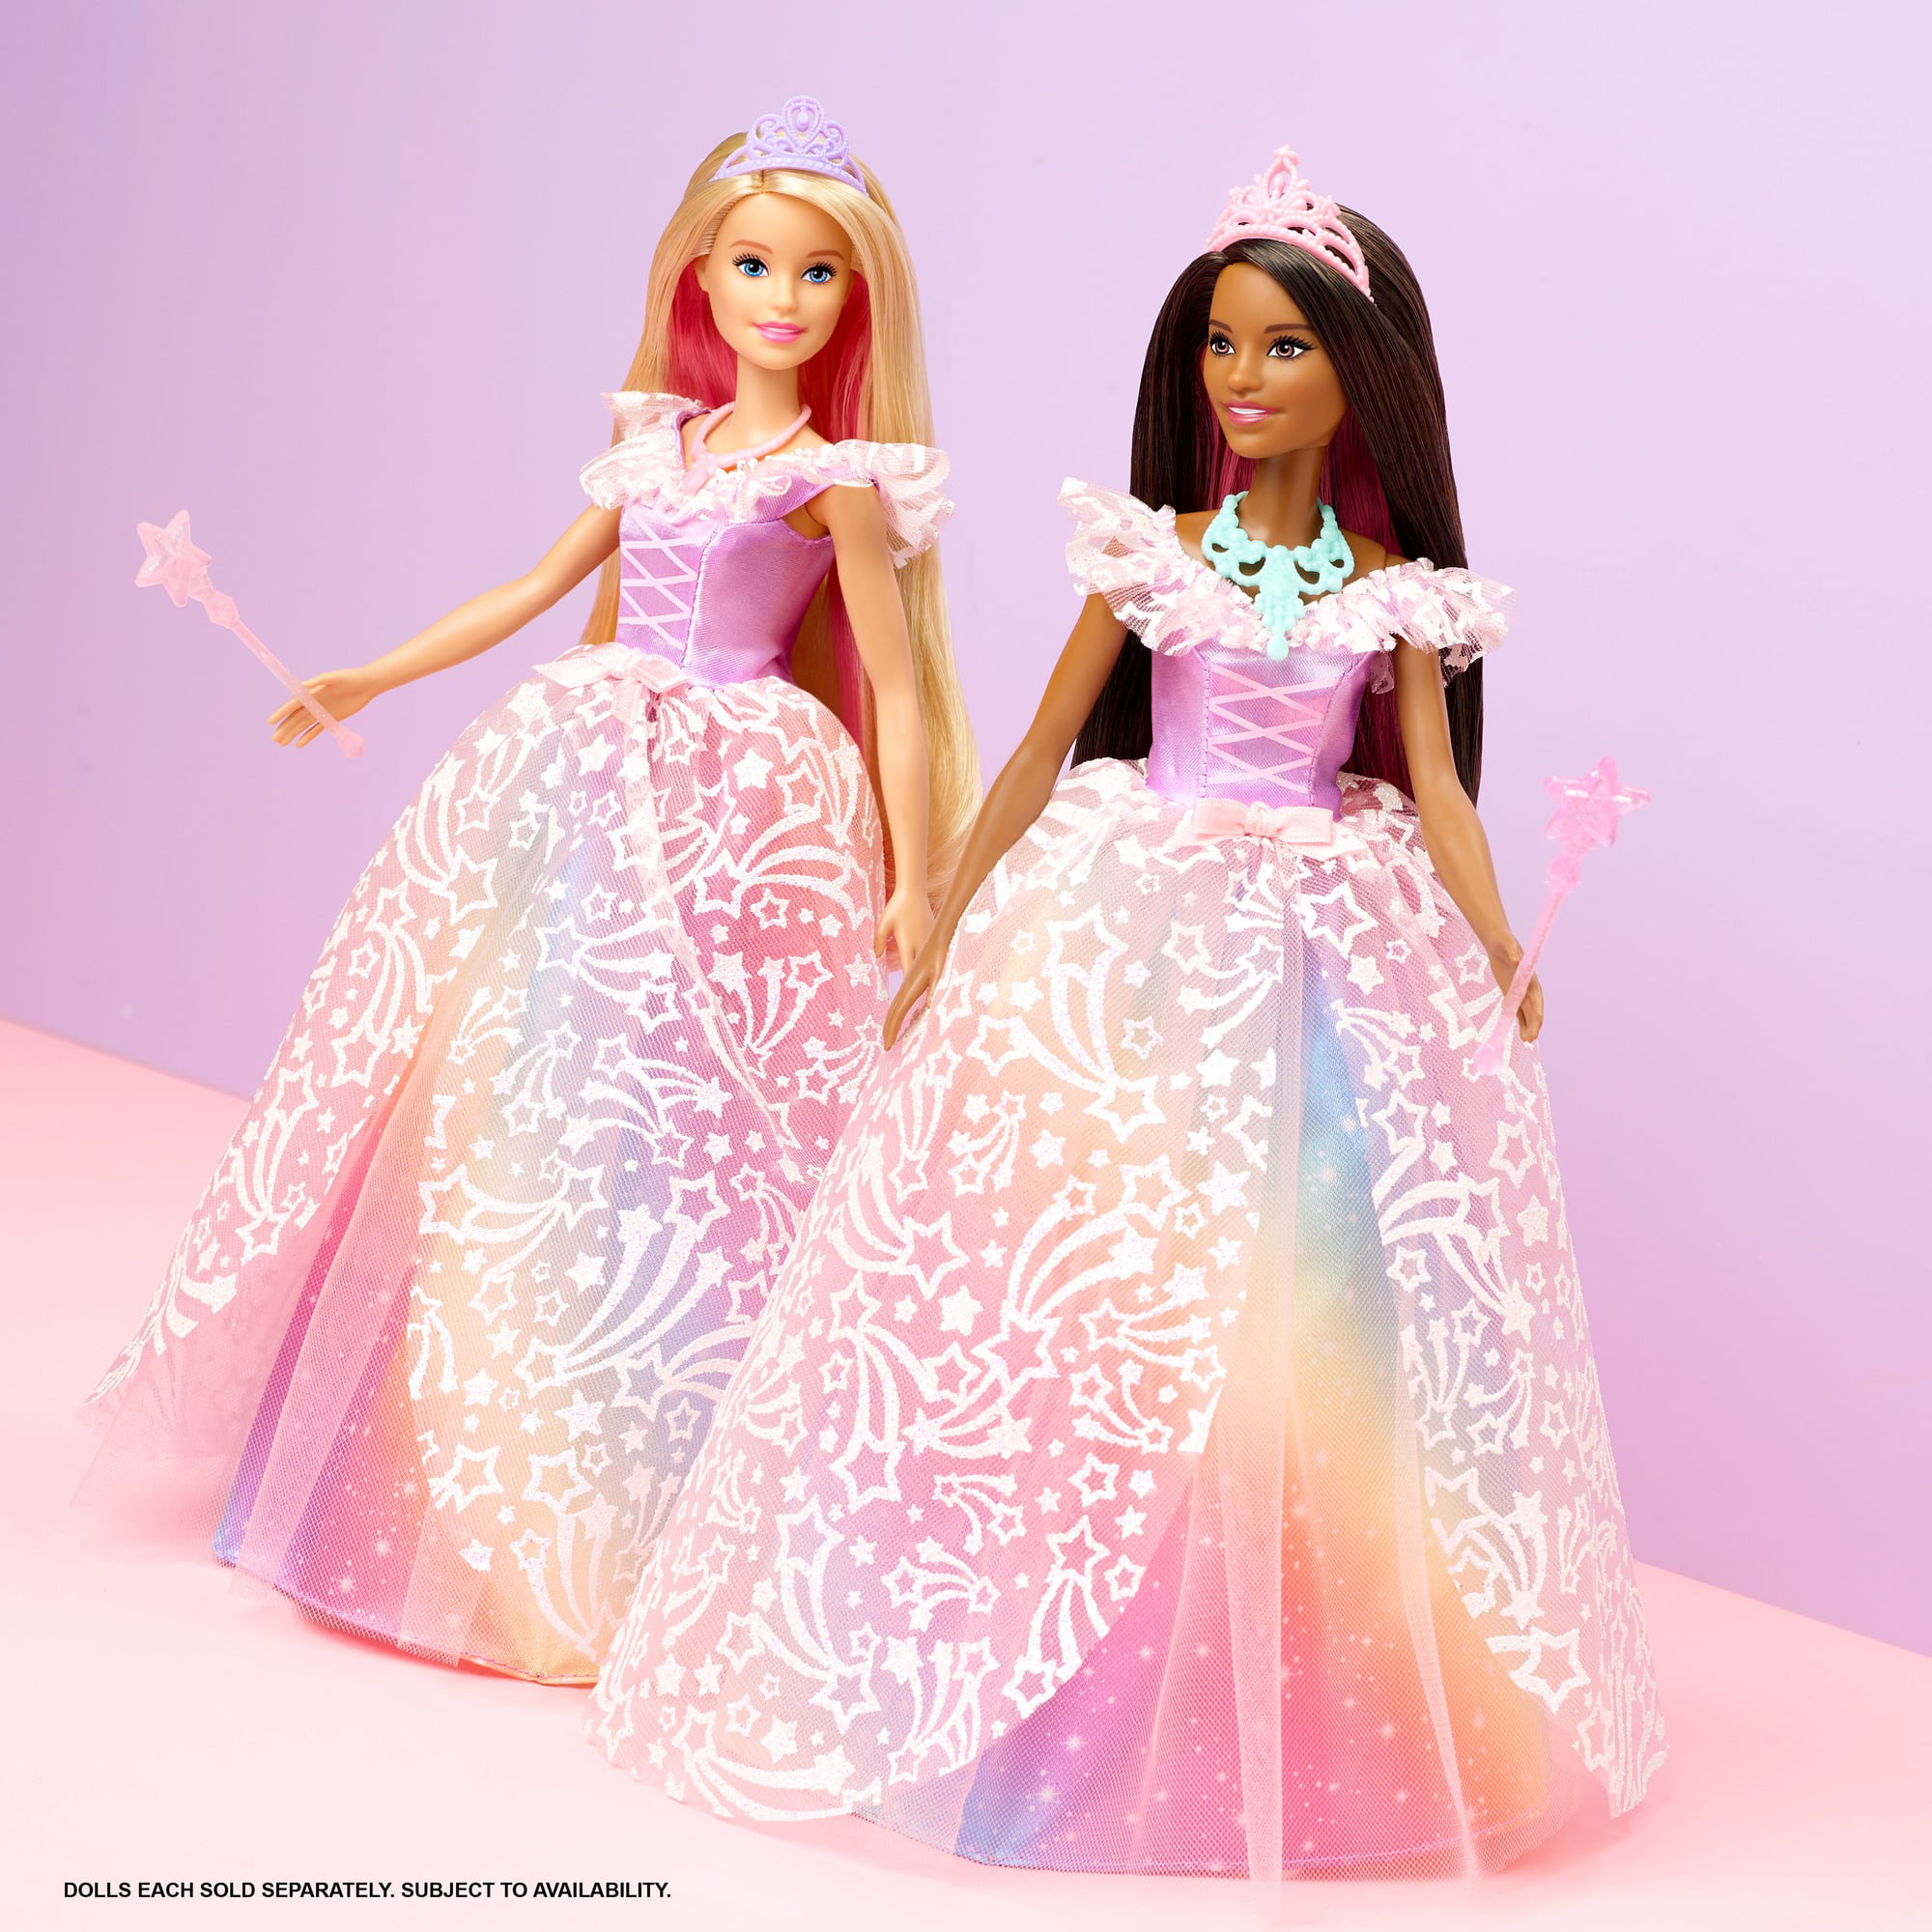 How to make a stunning Barbie ball gown fit for the Oscars - Galaxia Dolls